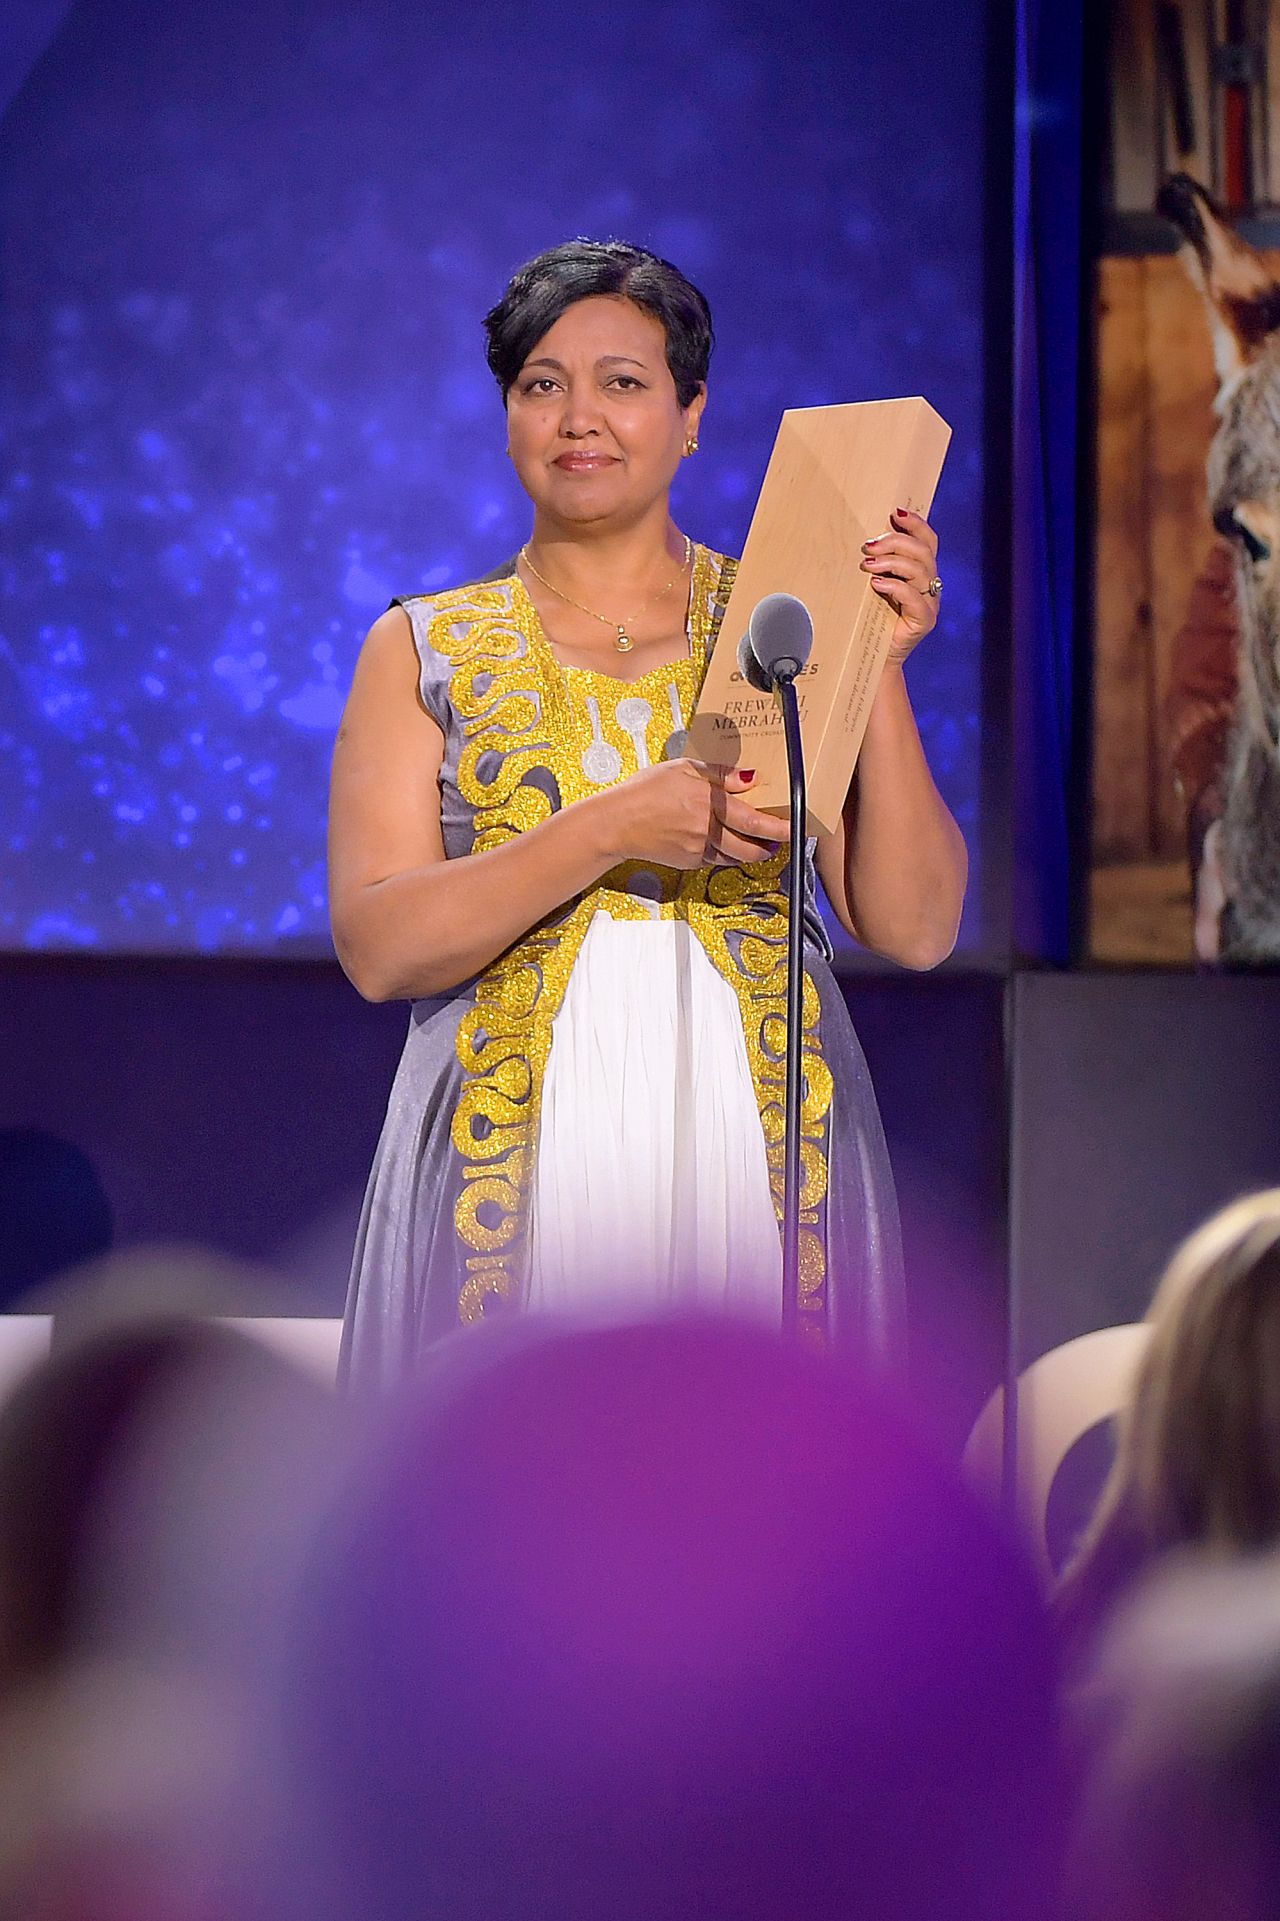 2019 Top 10 CNN Hero Freweini Mebrahtu holds up her award onstage. Mebrahtu teamed up with the nonprofit, Dignity Period, to end the stigma around the issue by speaking at schools and teaching girls and boys that menstruation is natural, not shameful.